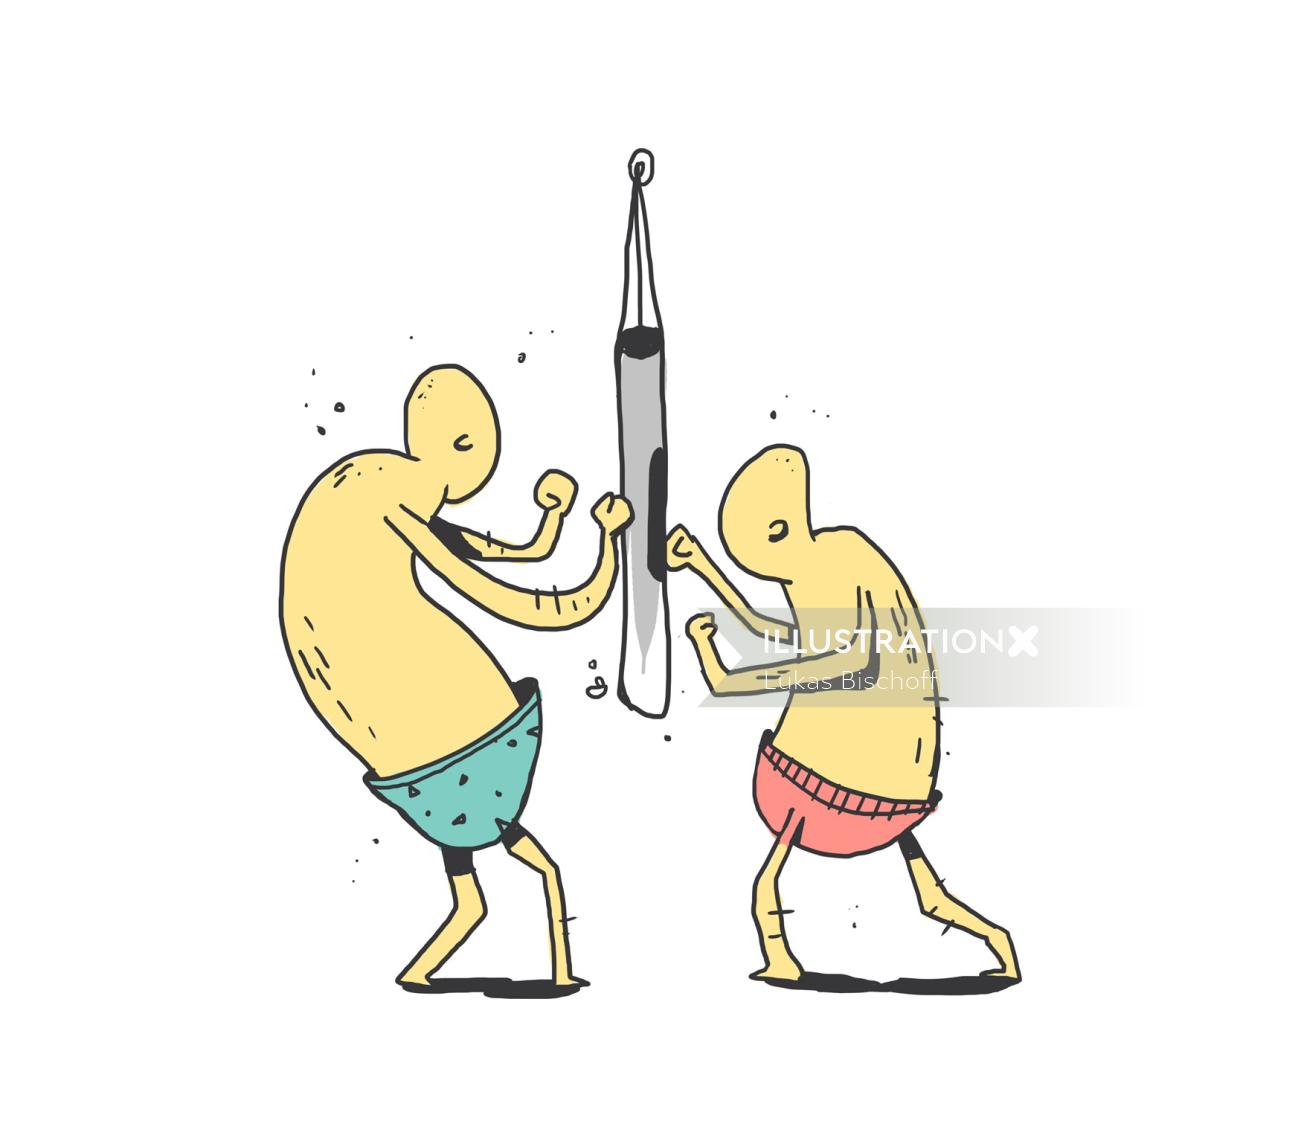 Graphic illustrations of people practicing boxing
